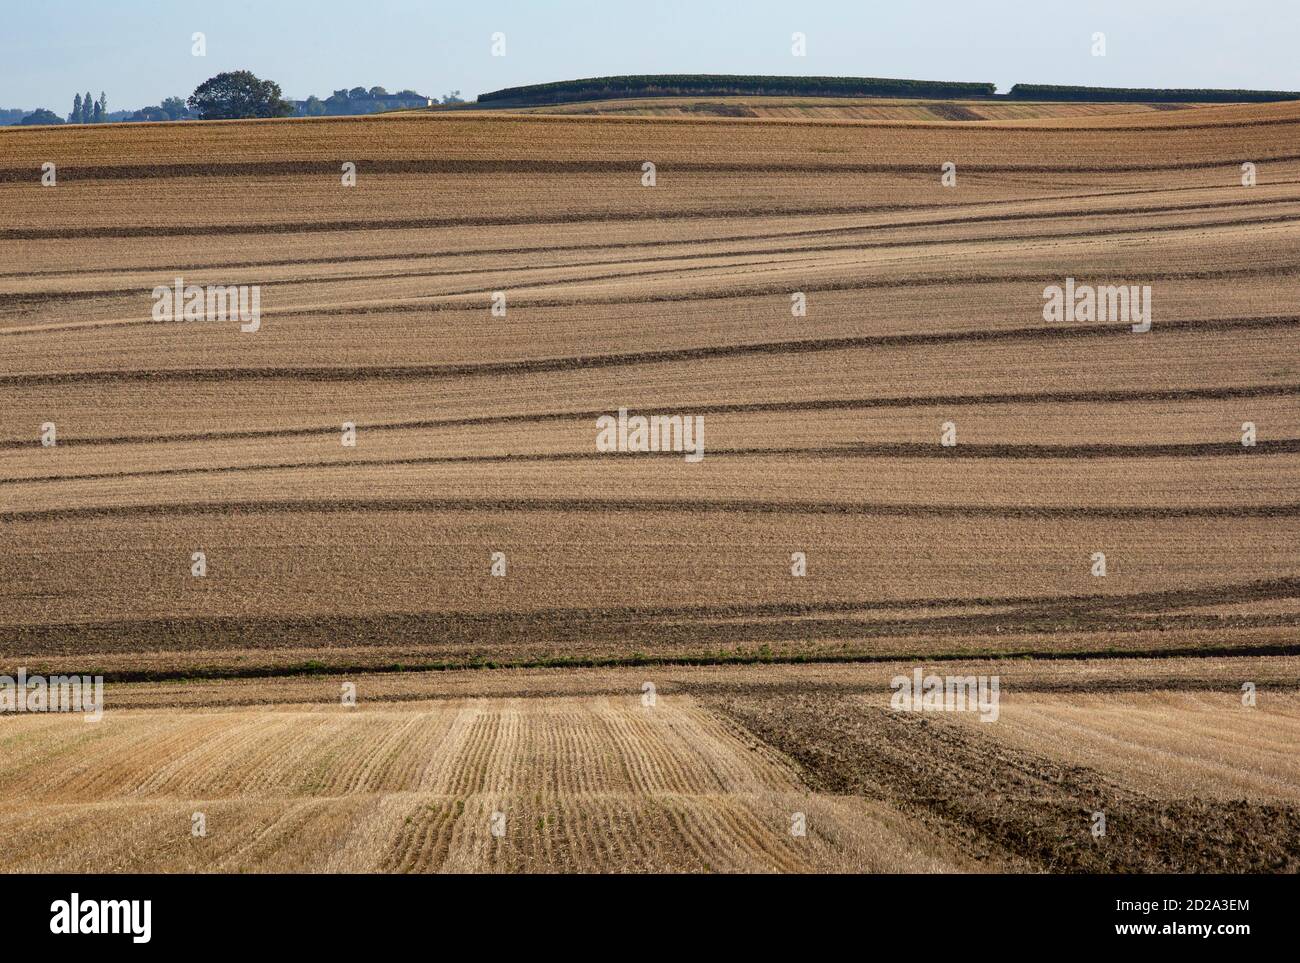 A farming landscape of gently rolling hills that are typical of The Gers region of South West France. Stock Photo